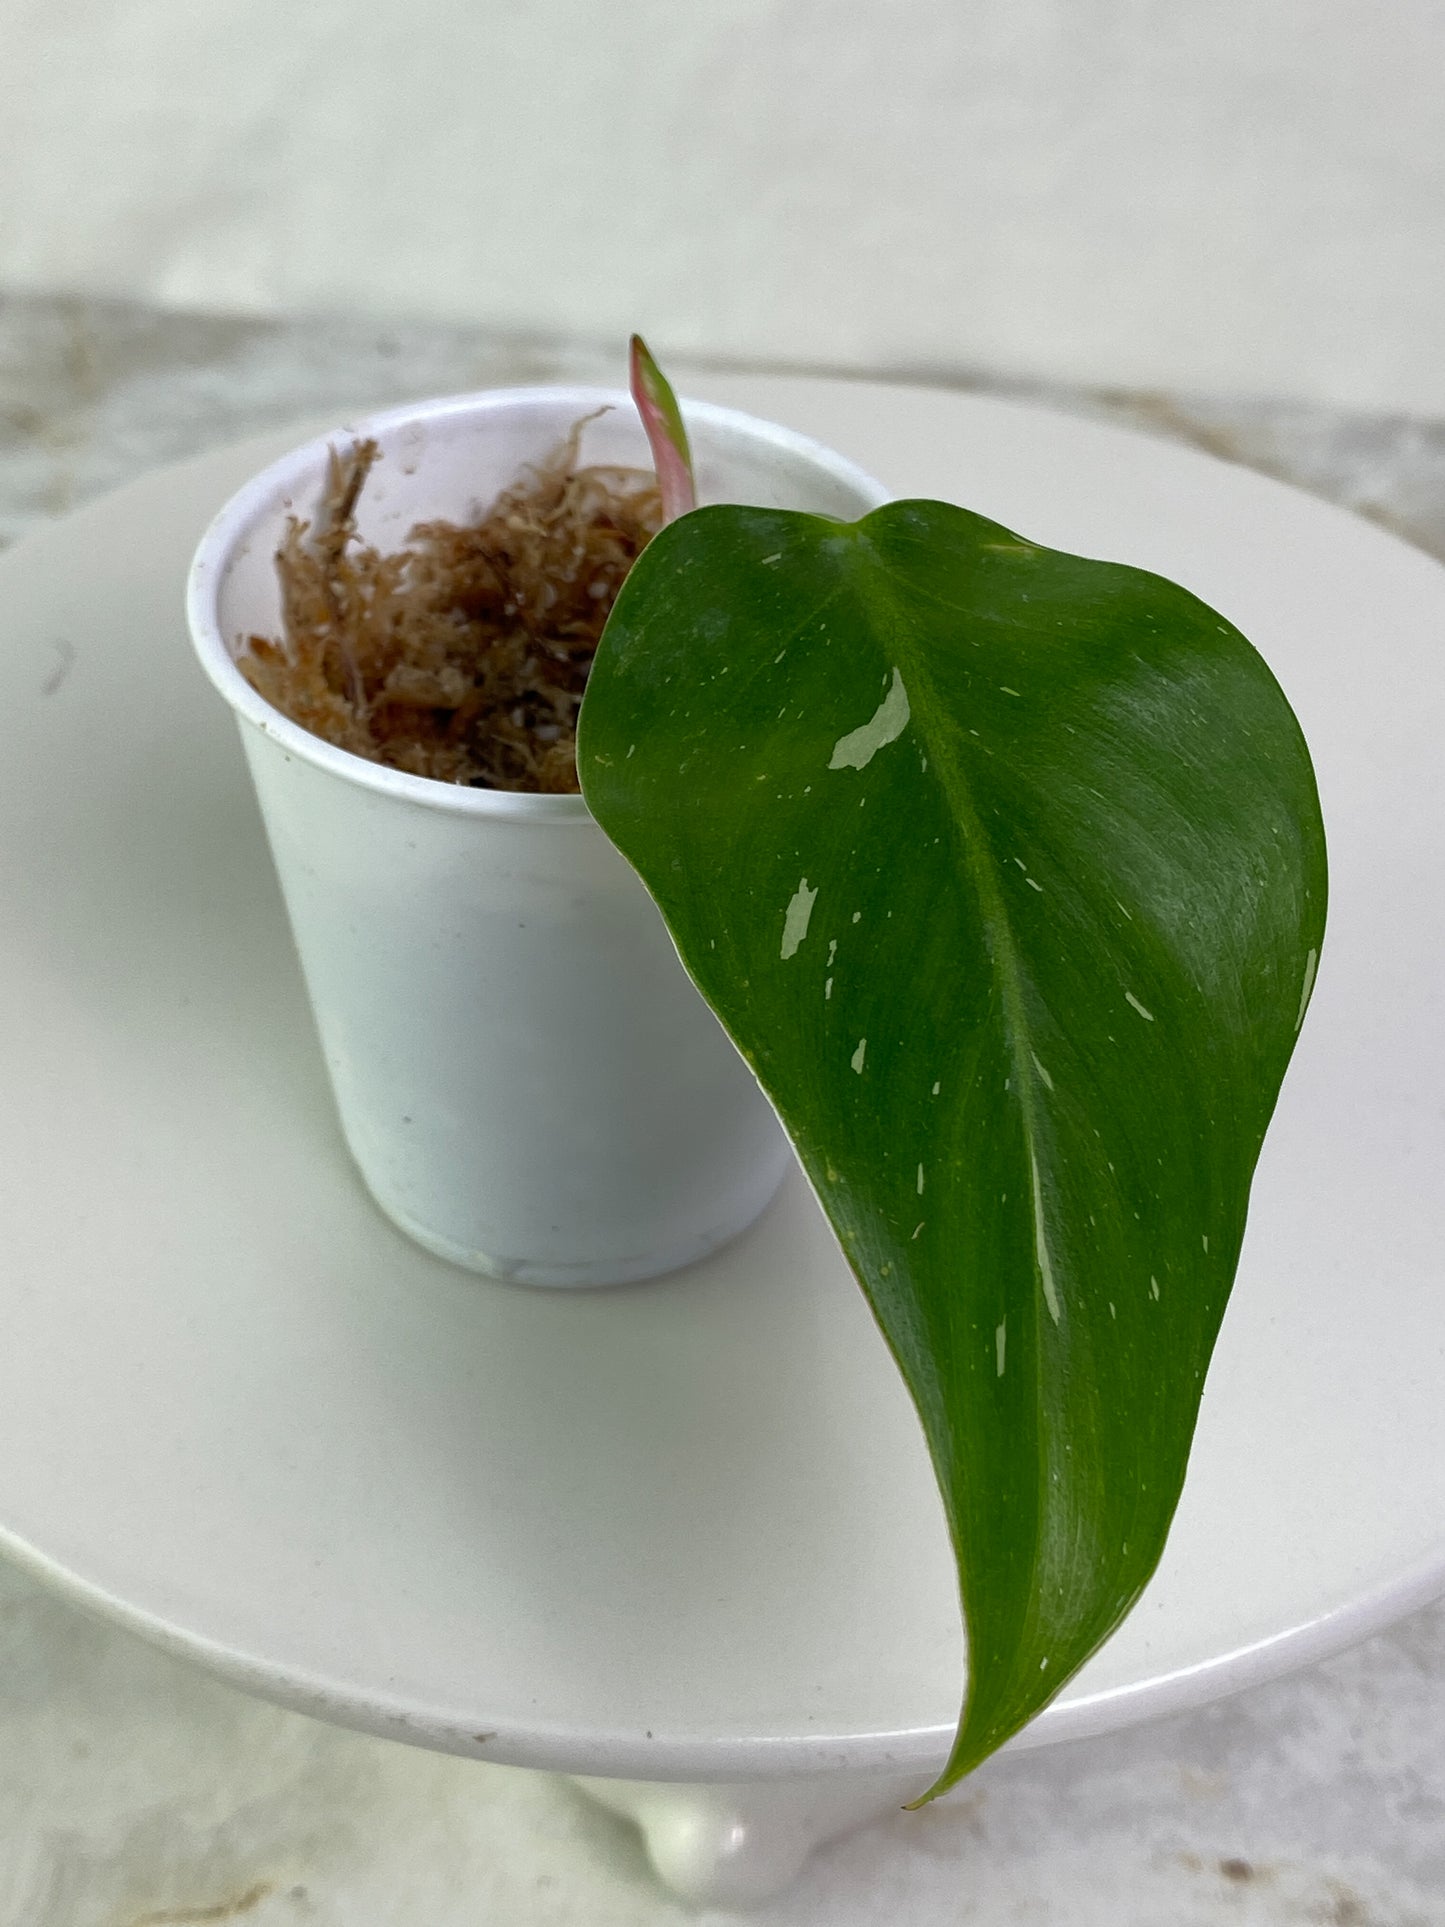 Philodendron white princess tricolor 1 leaf 1 sprout slightly rooted